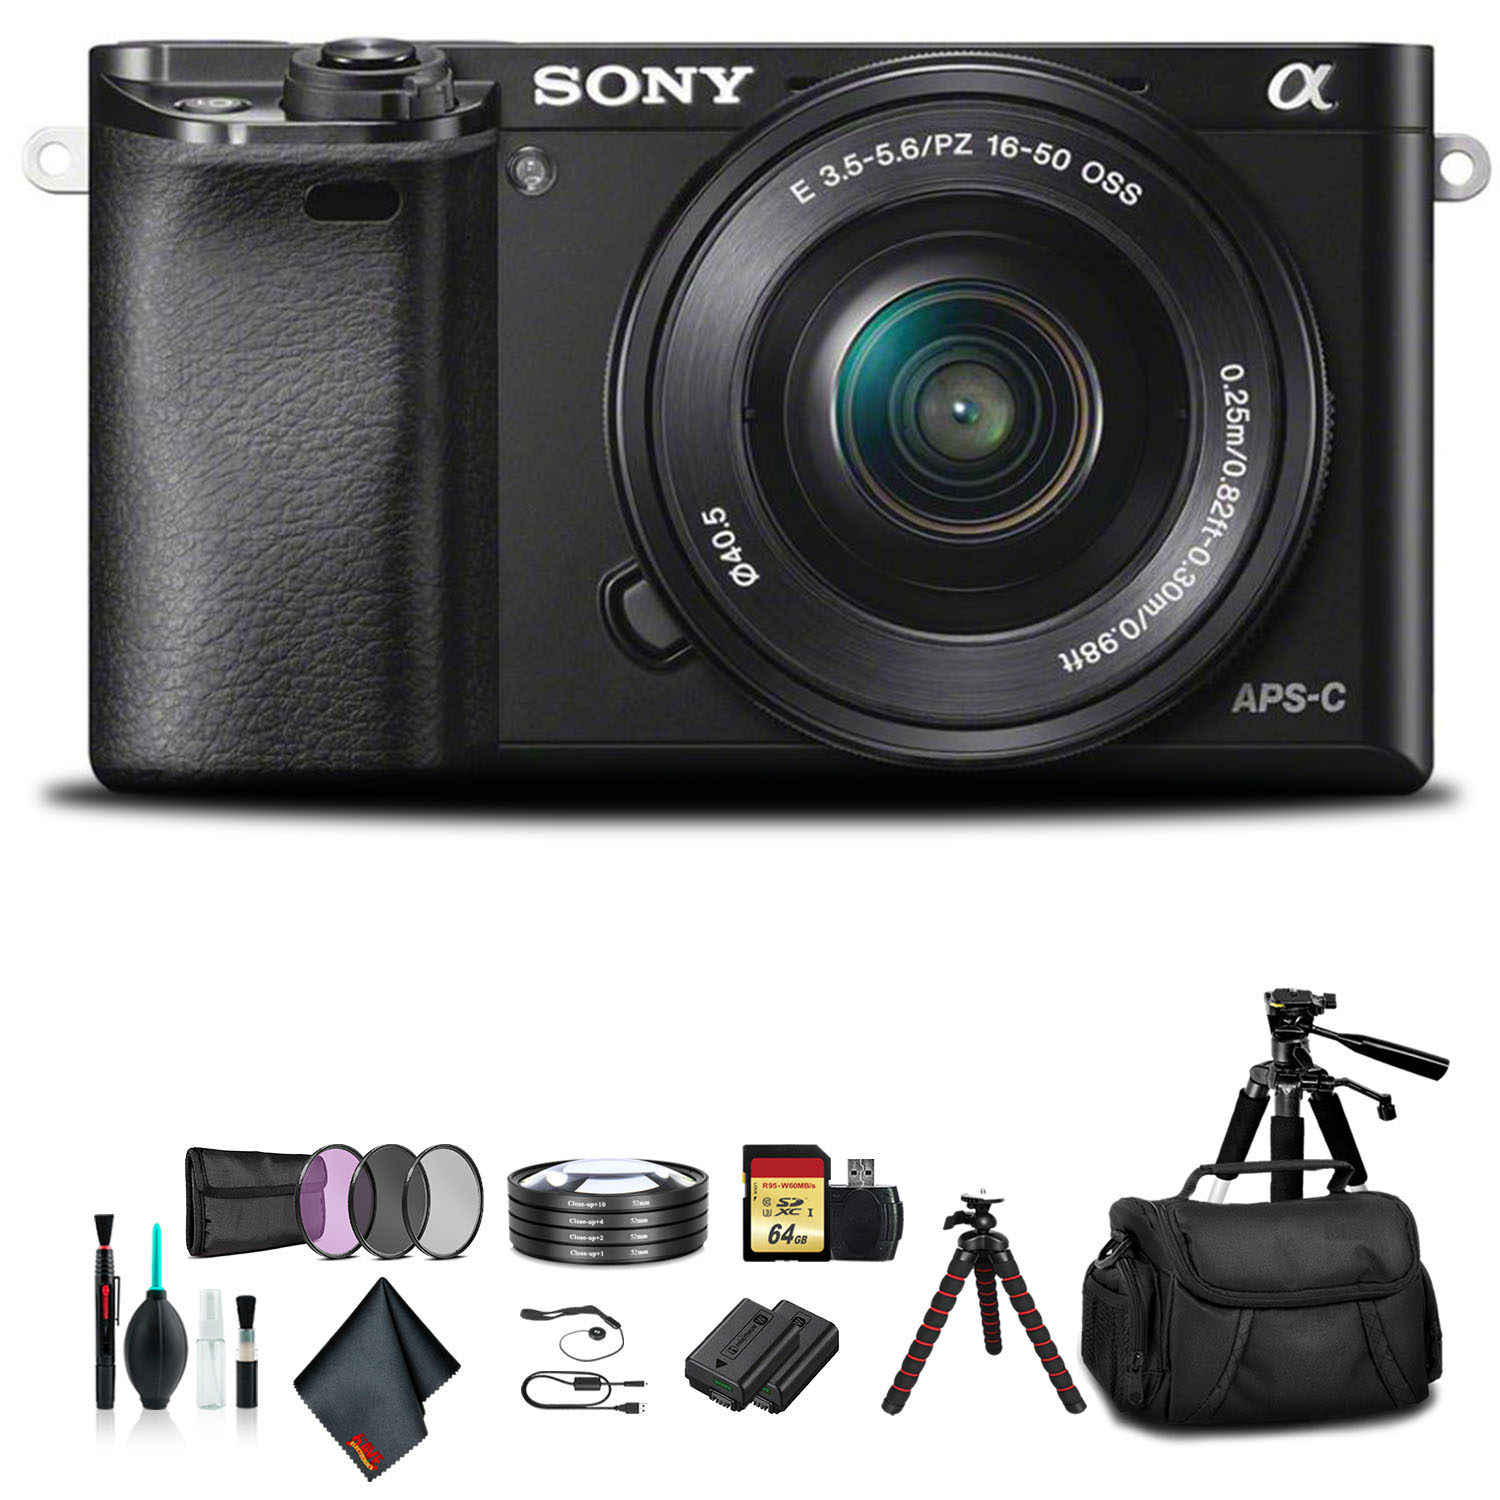 Sony Alpha a6000 Mirrorless Camera with 16-50mm Lens Black with Soft Bag, Additional Battery, 64GB Memory Card, Card Rea - image 1 of 5